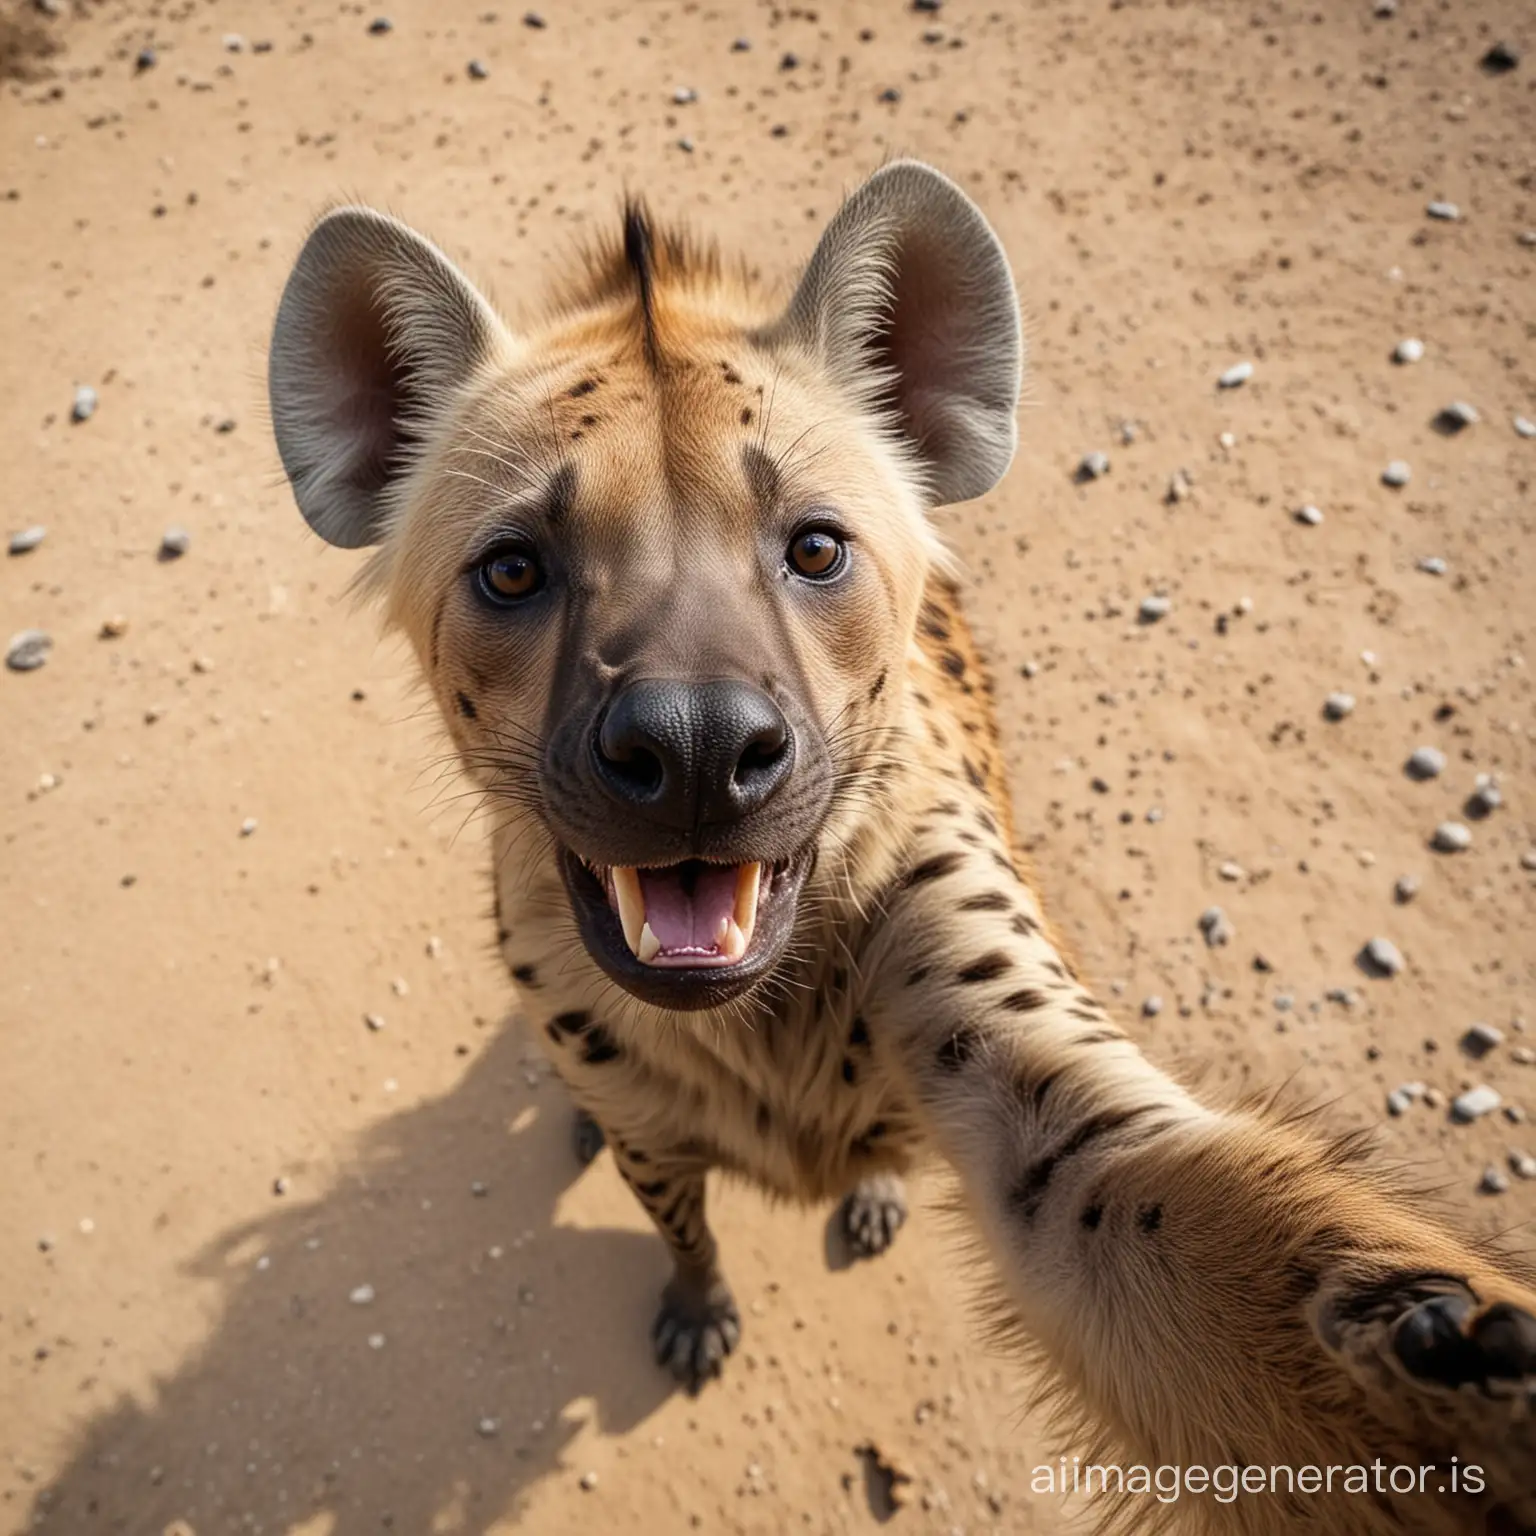 a hyena takes a selfie the photo is taken from above it, very realistic photo, no blur